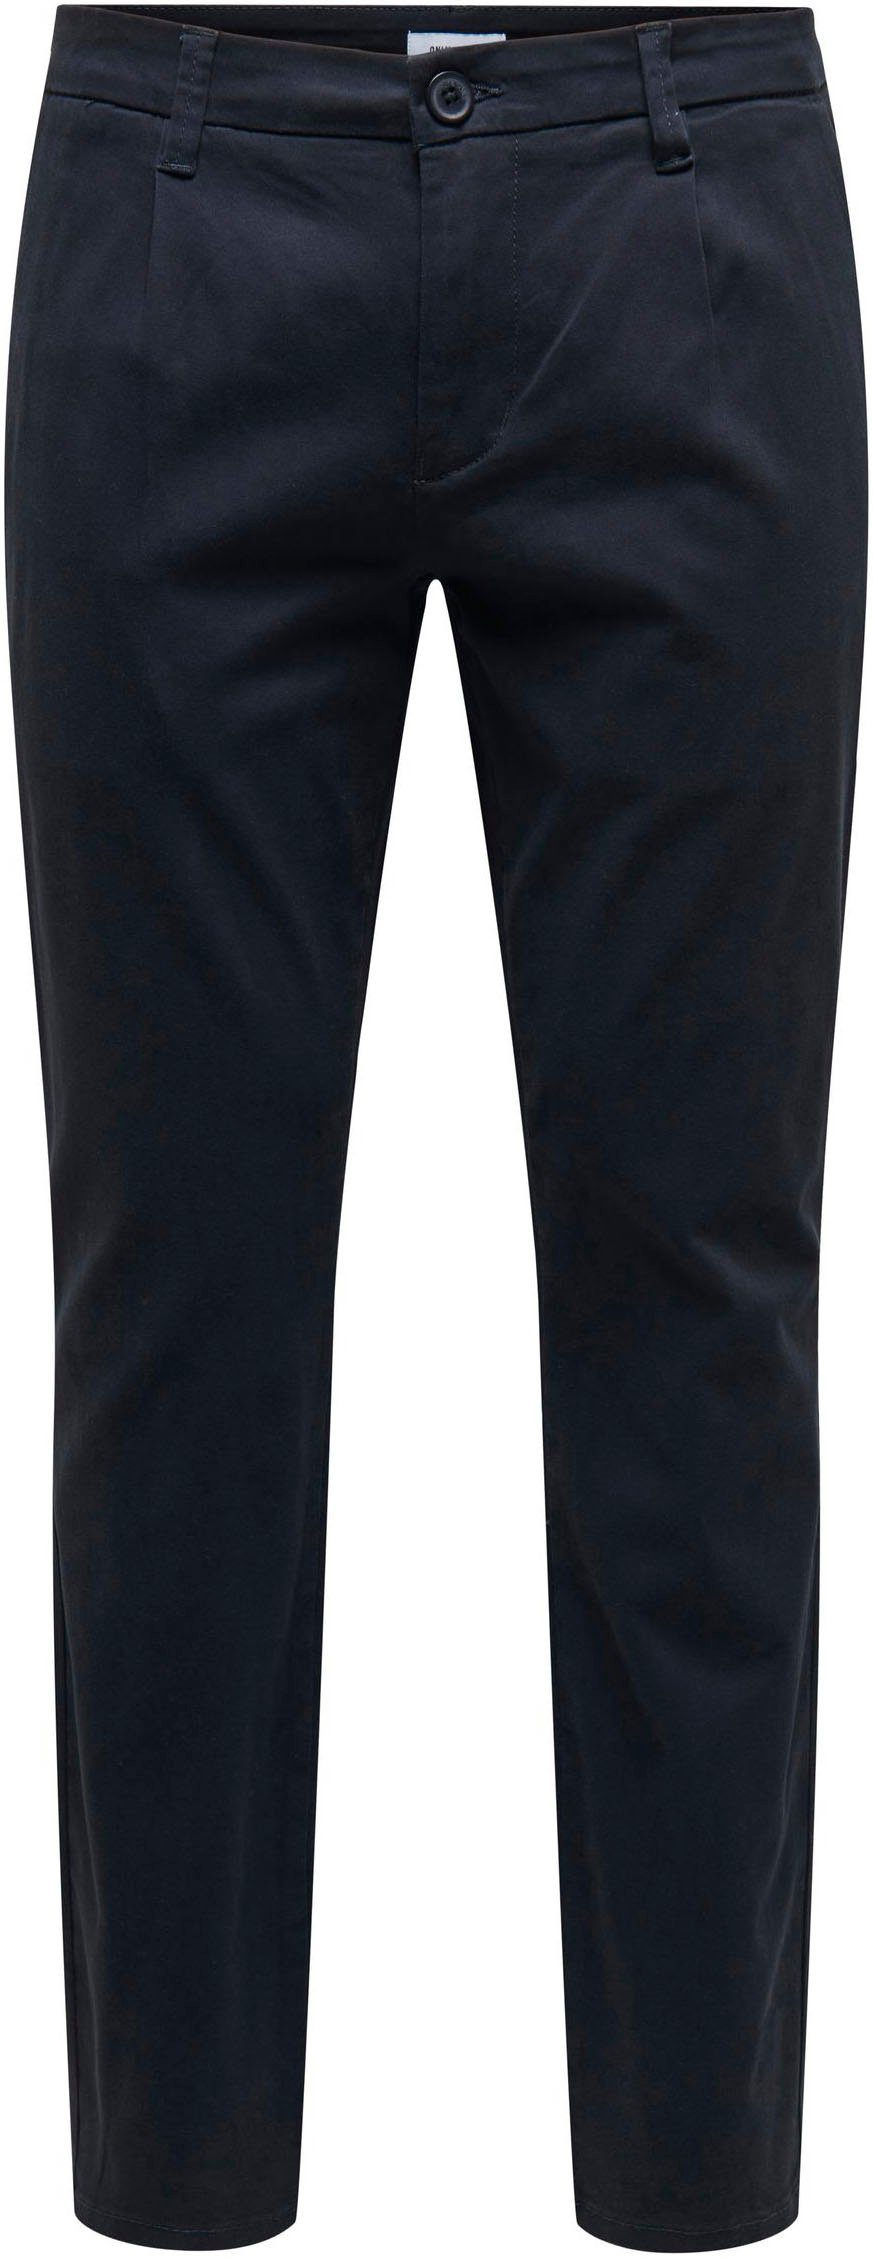 Dark SONS PK ONSCAM CHINO & Navy ONLY Chinohose LIFE 6775